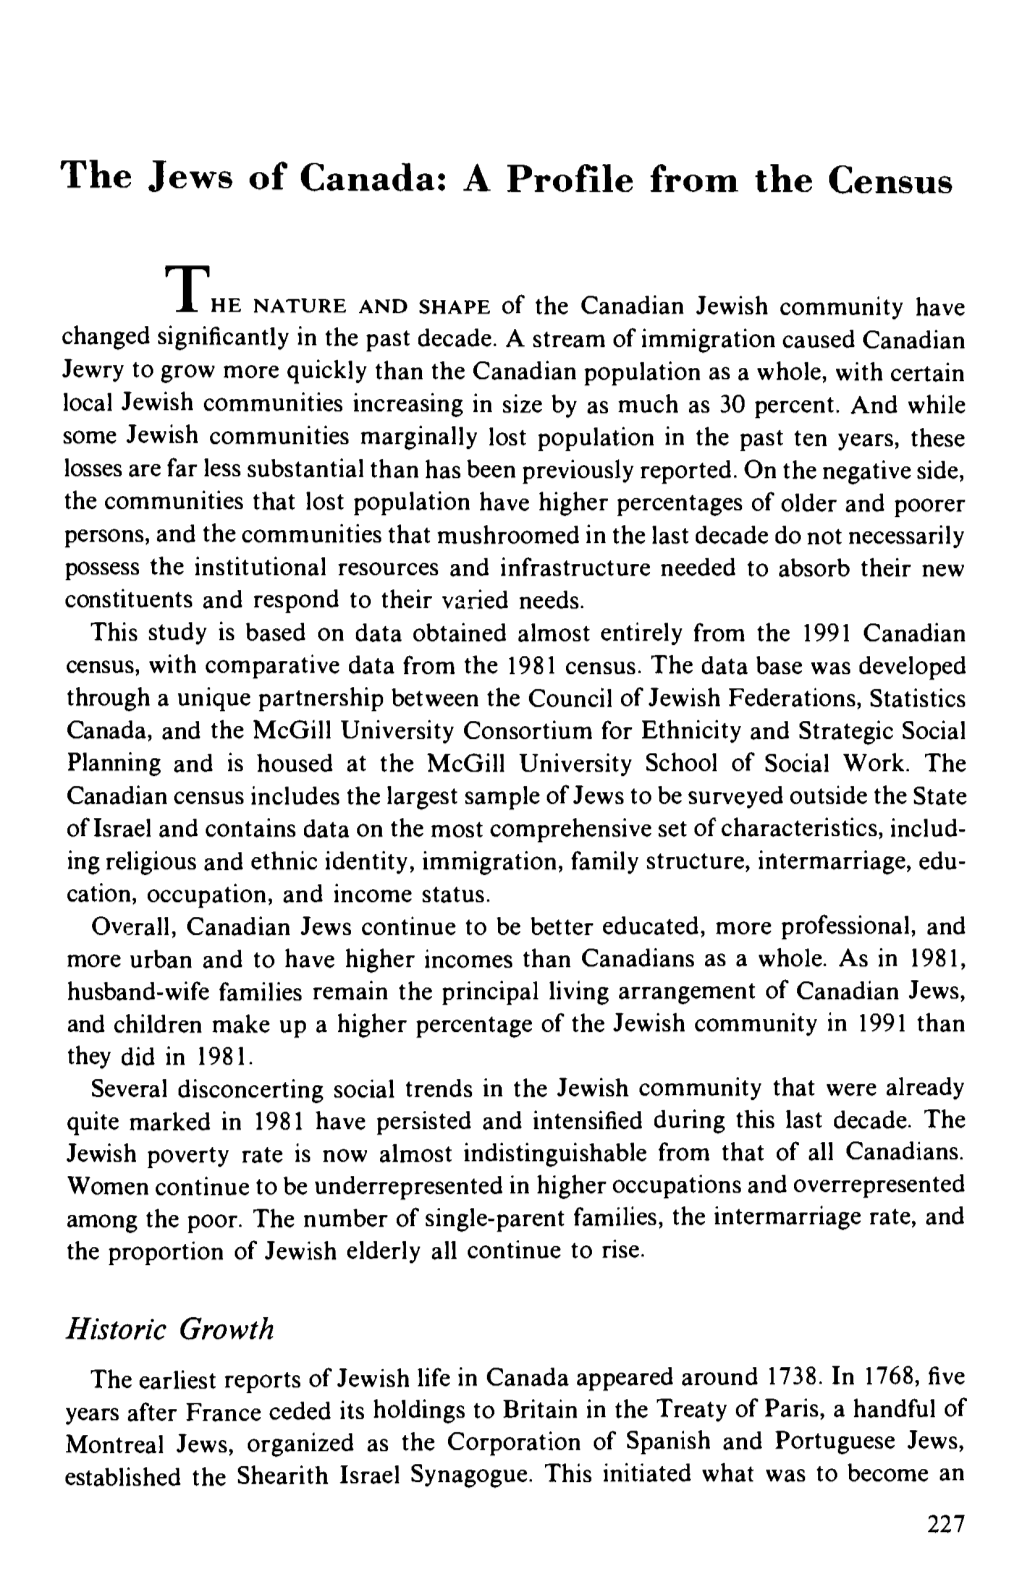 The Jews of Canada: a Profile from the Census